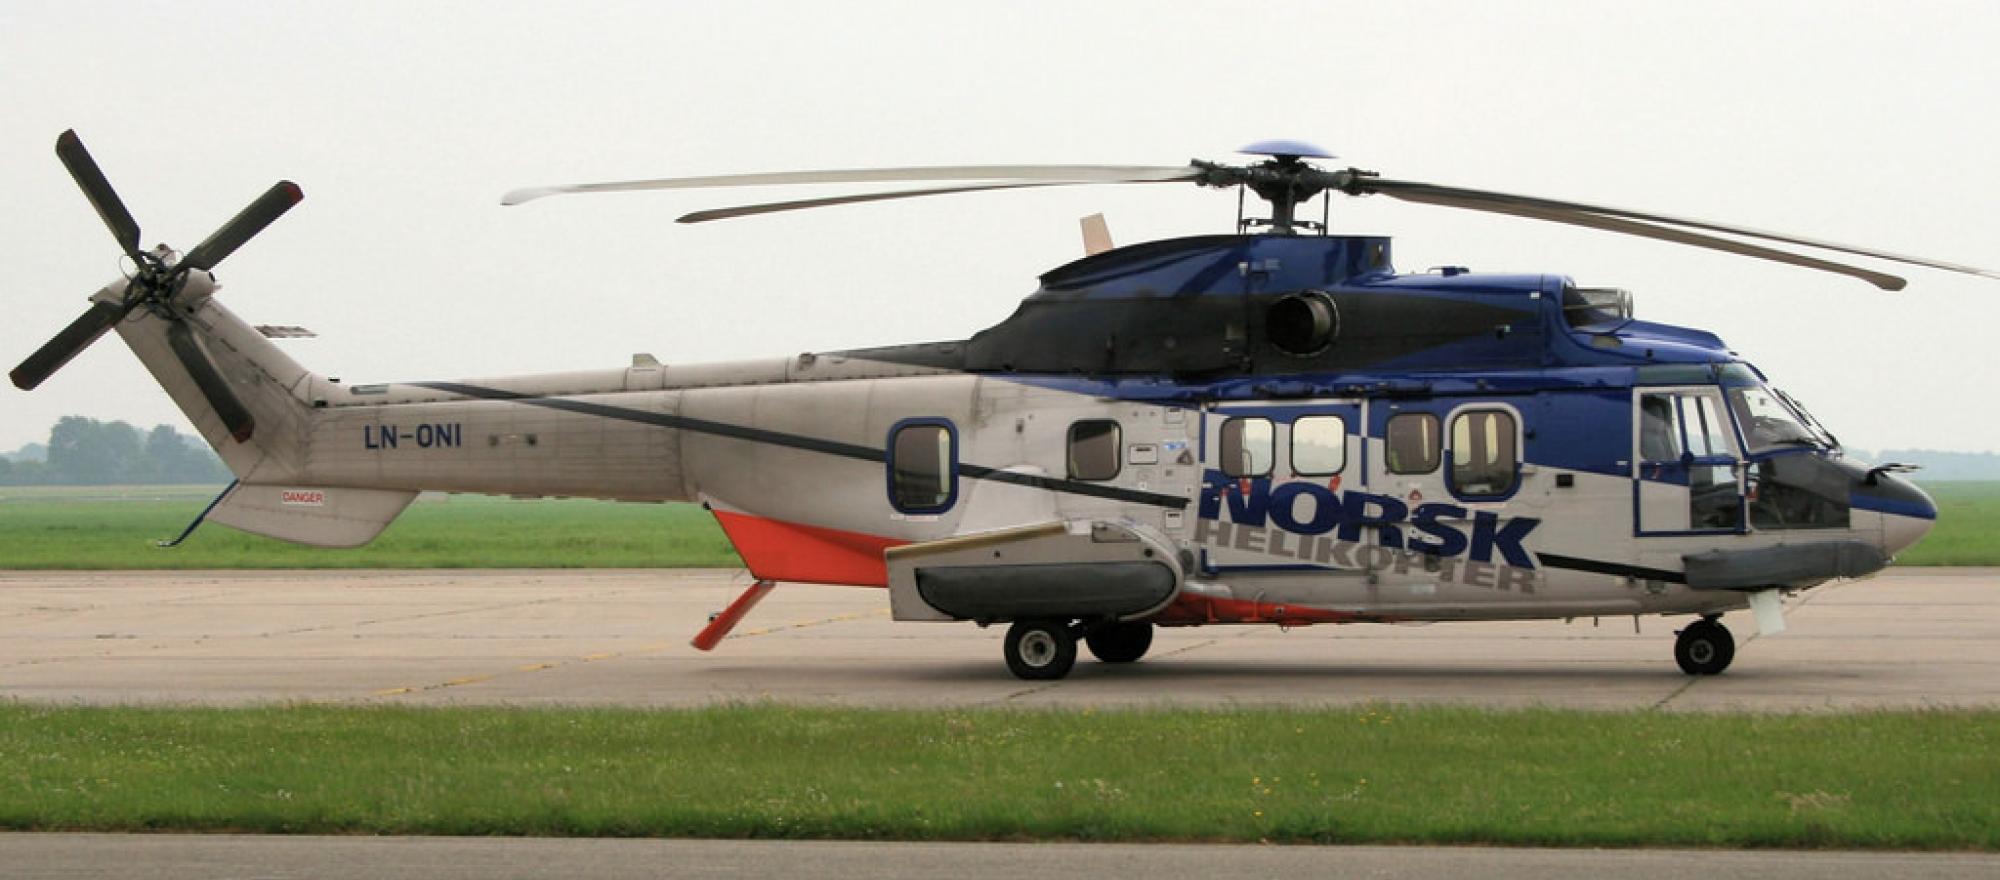 Airbus Helicopters AS332L2 Super Puma